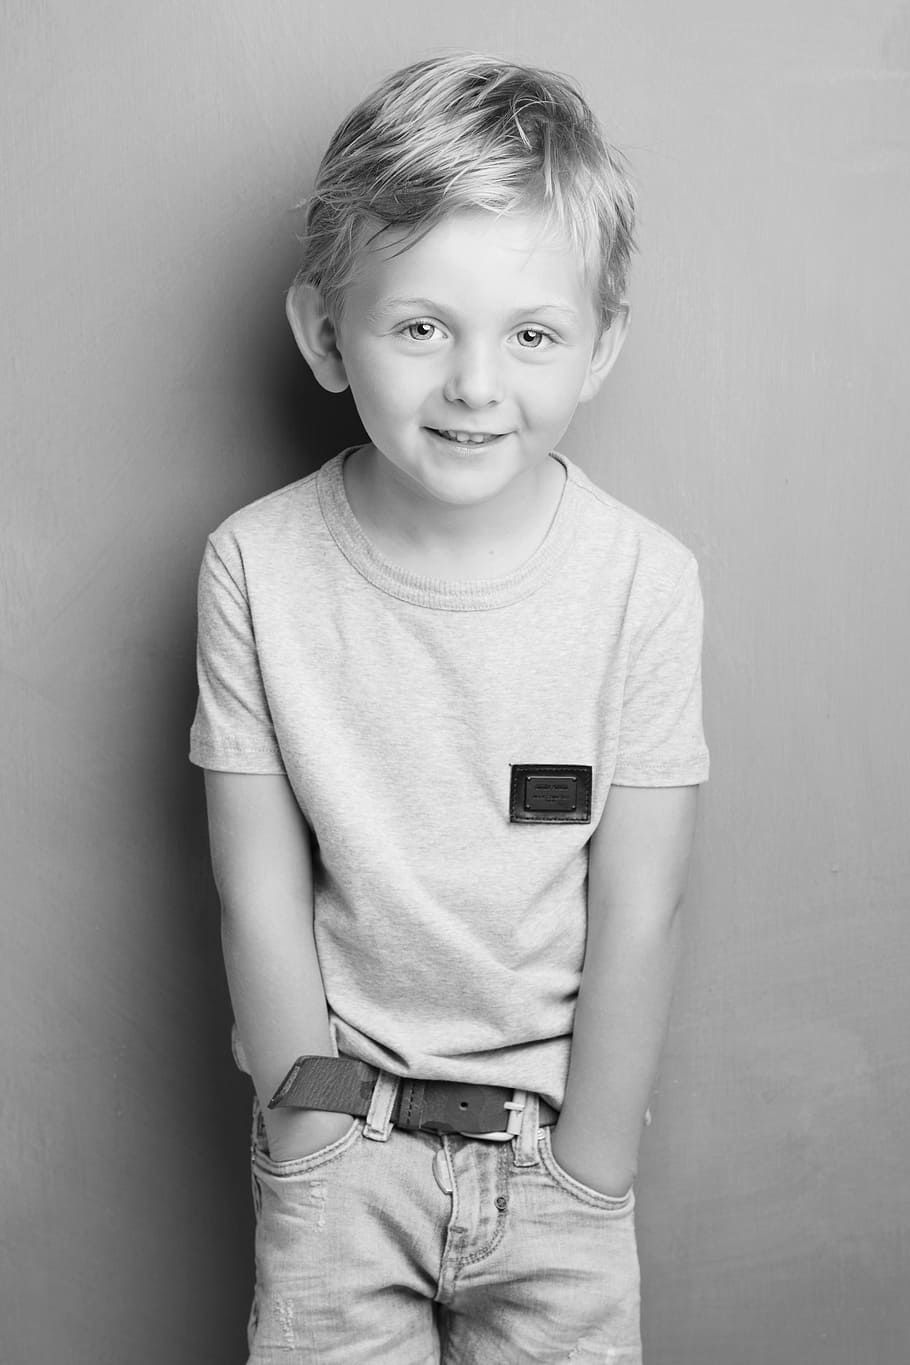 portrait photo, boy, child, glance, portrait, looking at camera, front view, smiling, casual clothing, one person